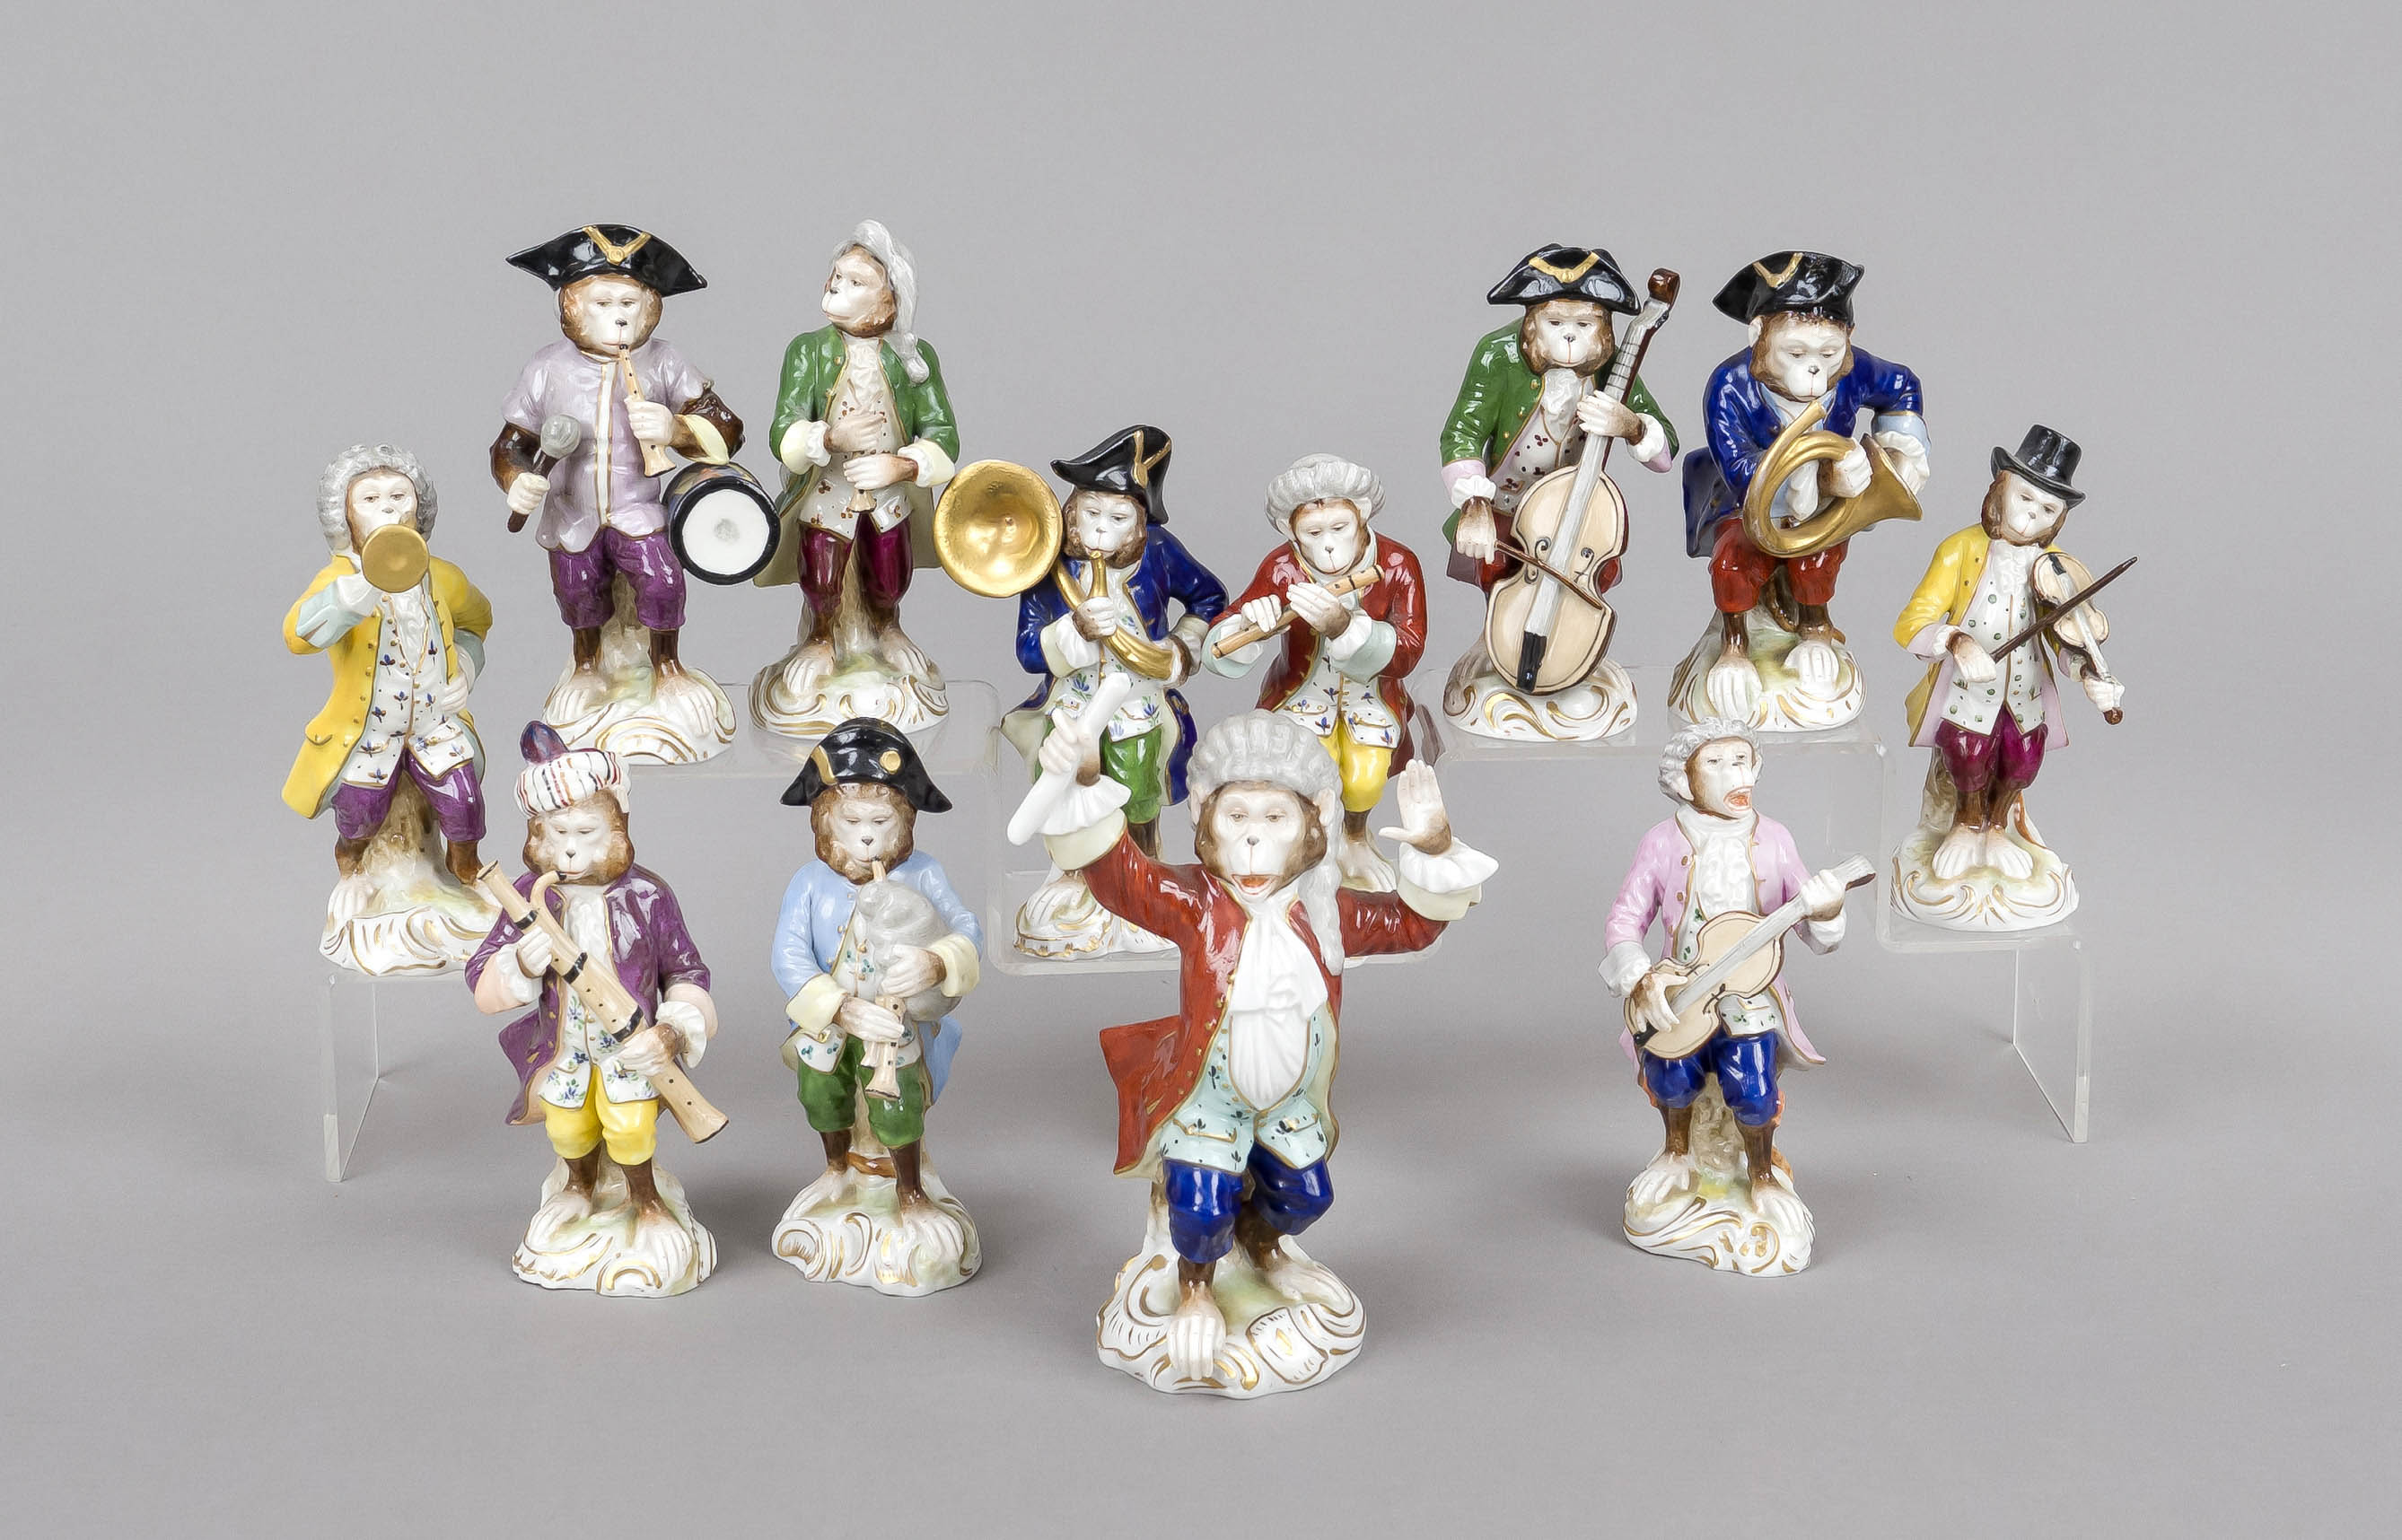 Monkey chapel, 12-piece, Rudolstadt, Thuringia, 20th century, after the Meissen model, mostly Naples